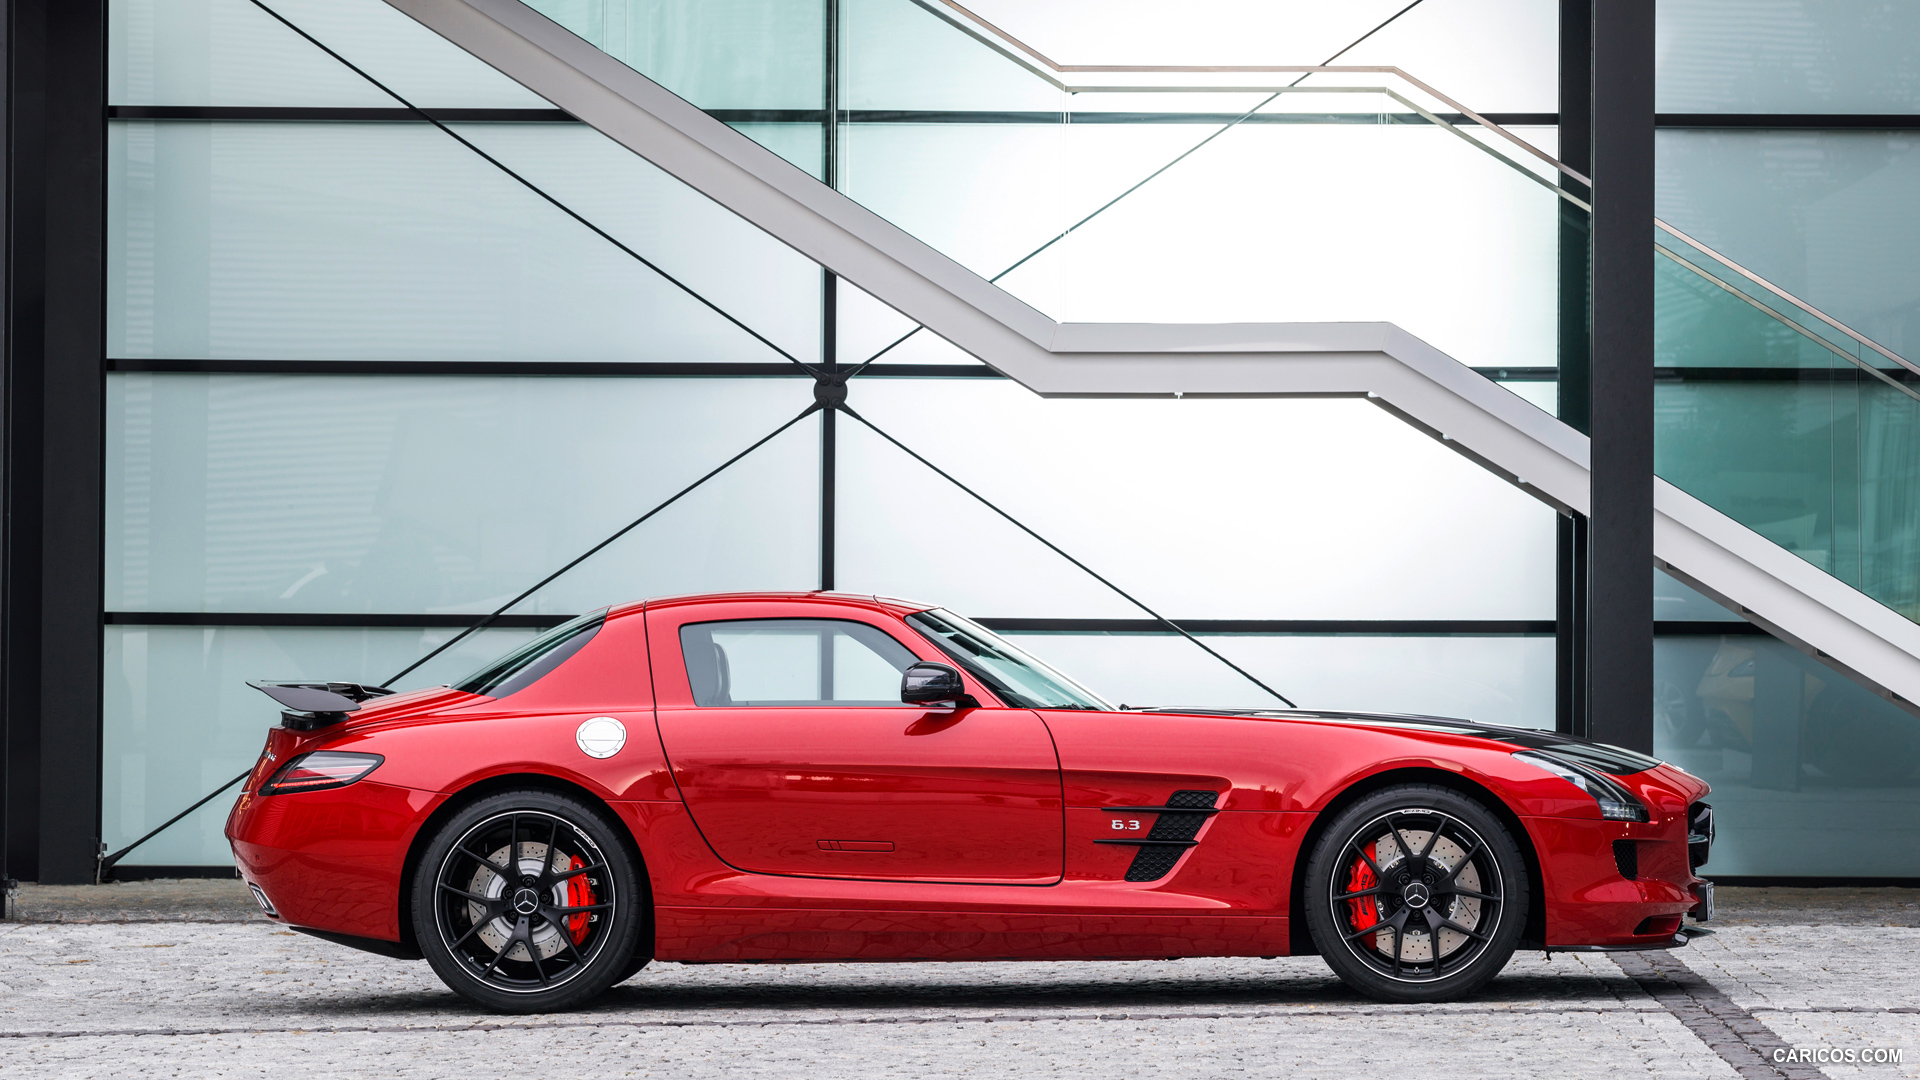  2015 Mercedes-Benz SLS AMG GT Coupe Final Edition - Side, #9 of 41